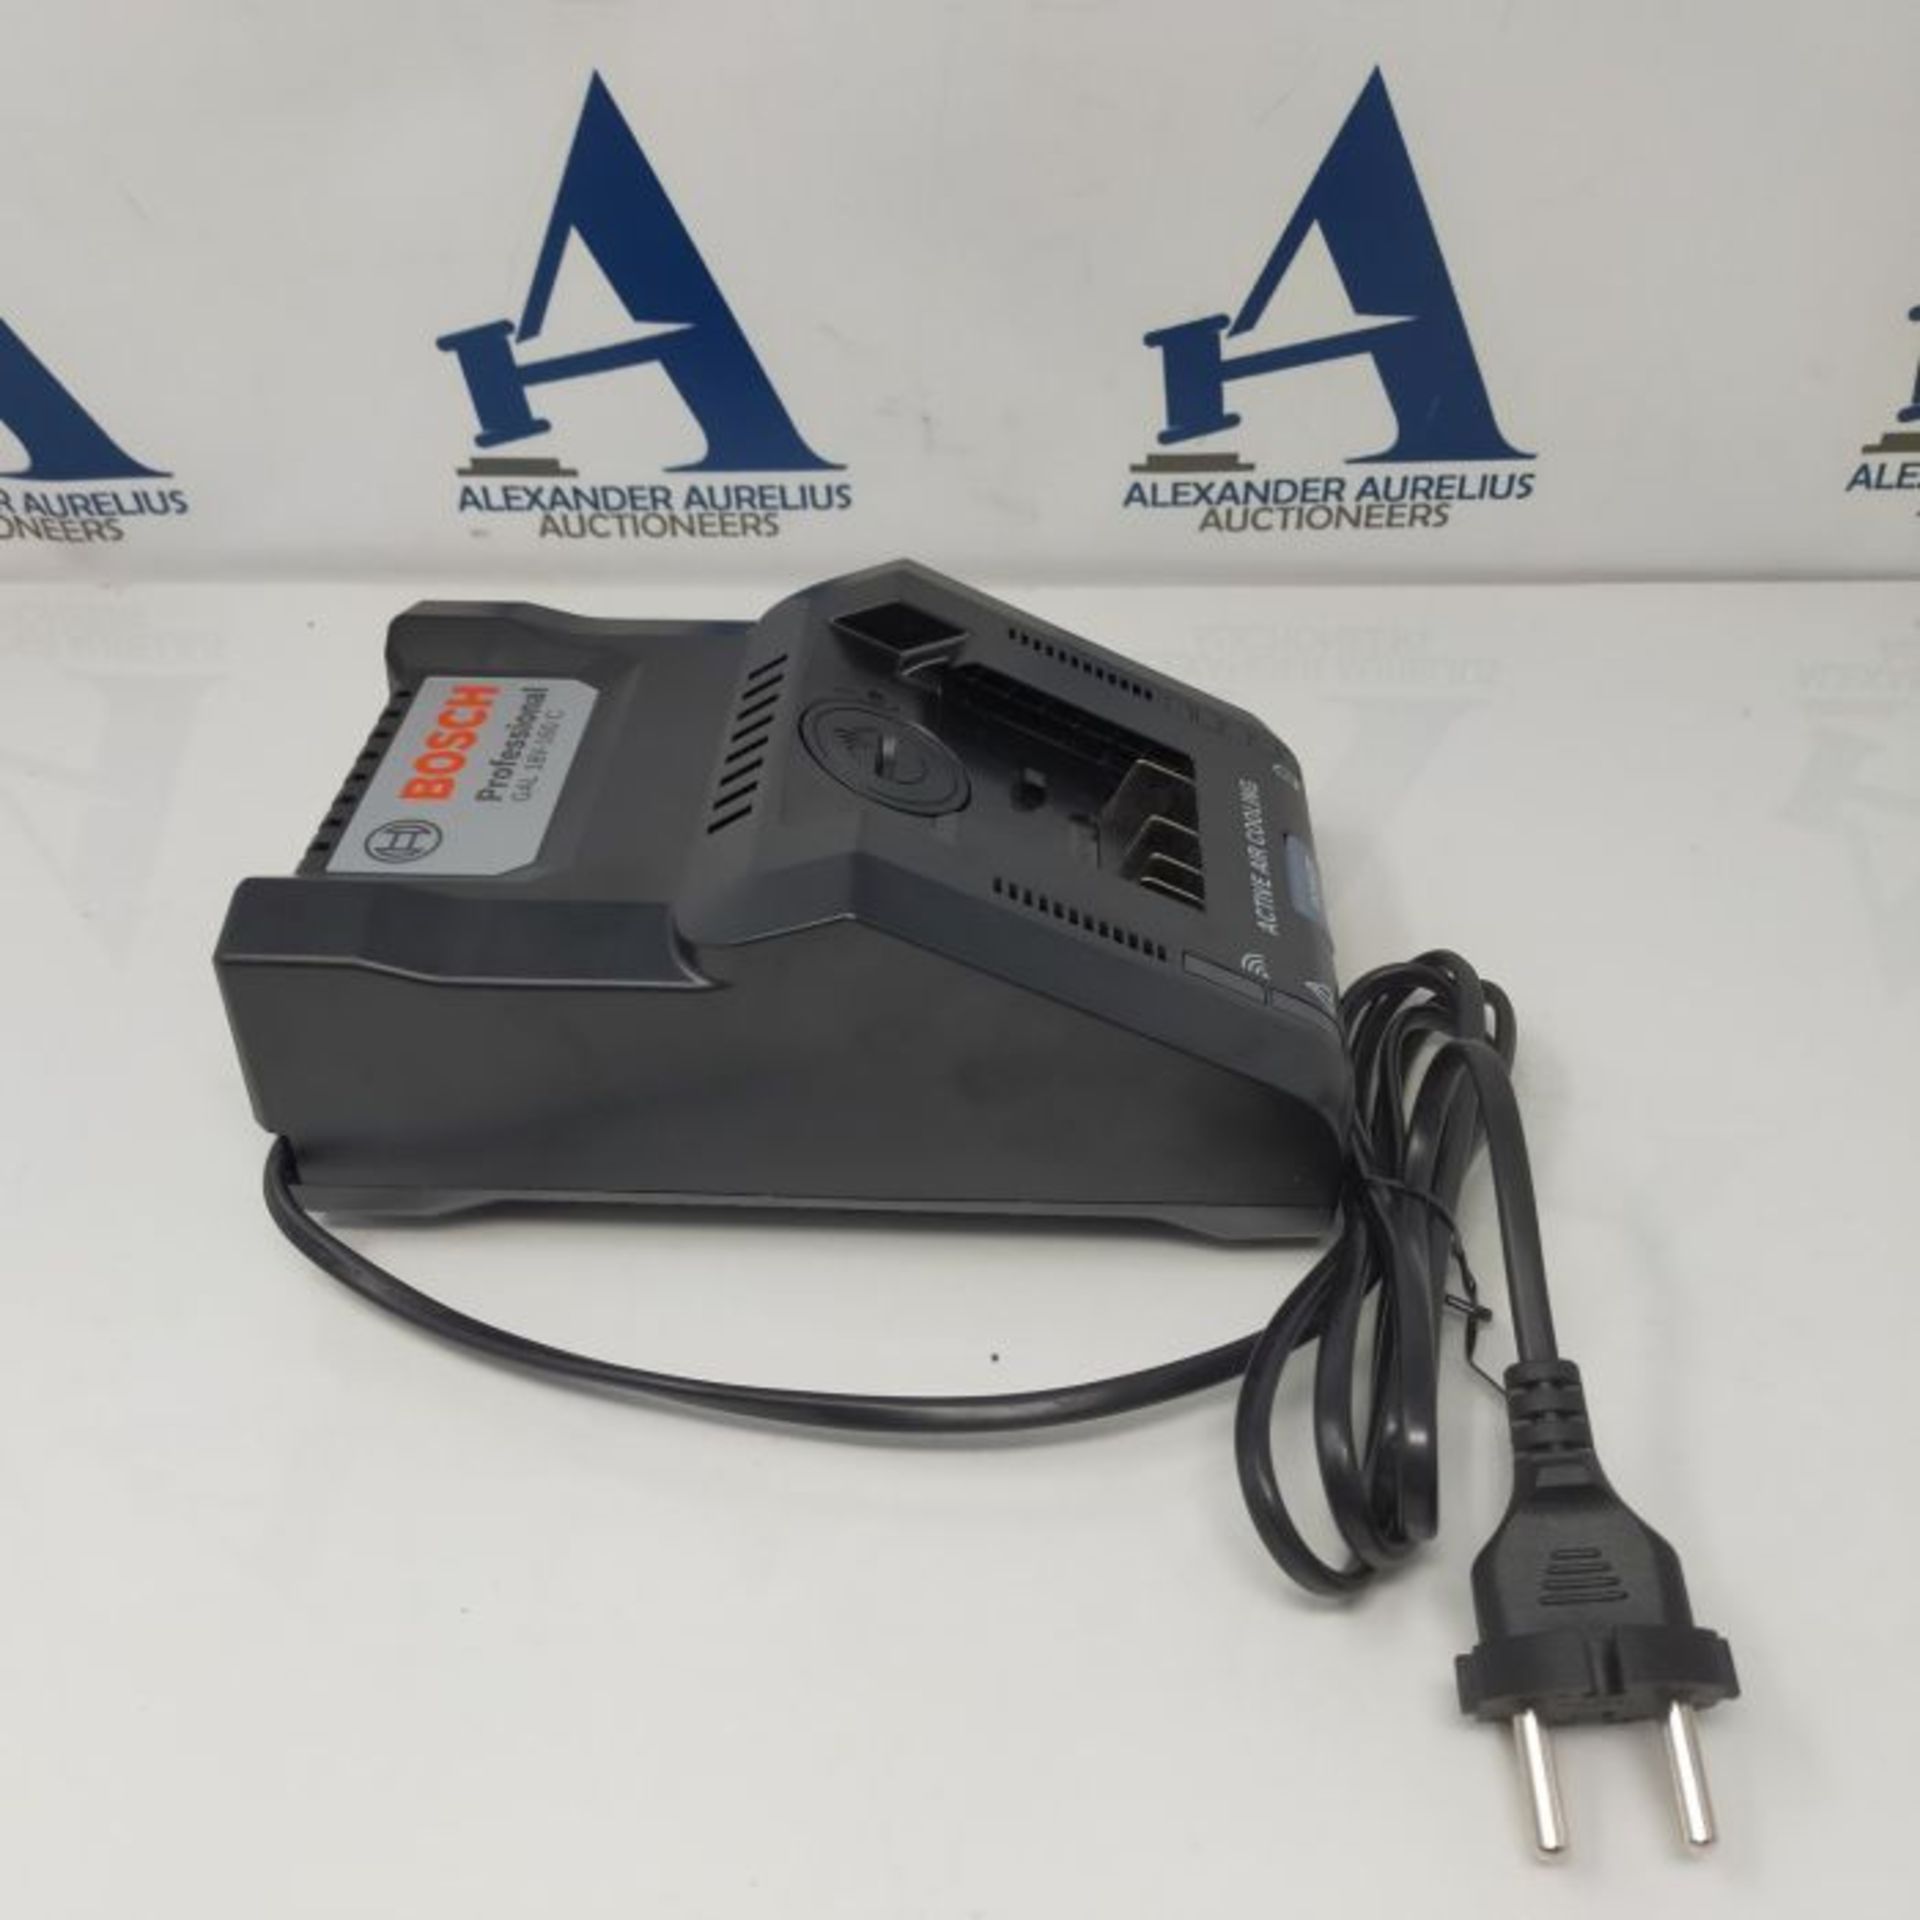 RRP £73.00 Bosch Professional 18V System battery fast charger GAL 18V-160 C (with Connectivity Mo - Image 2 of 3